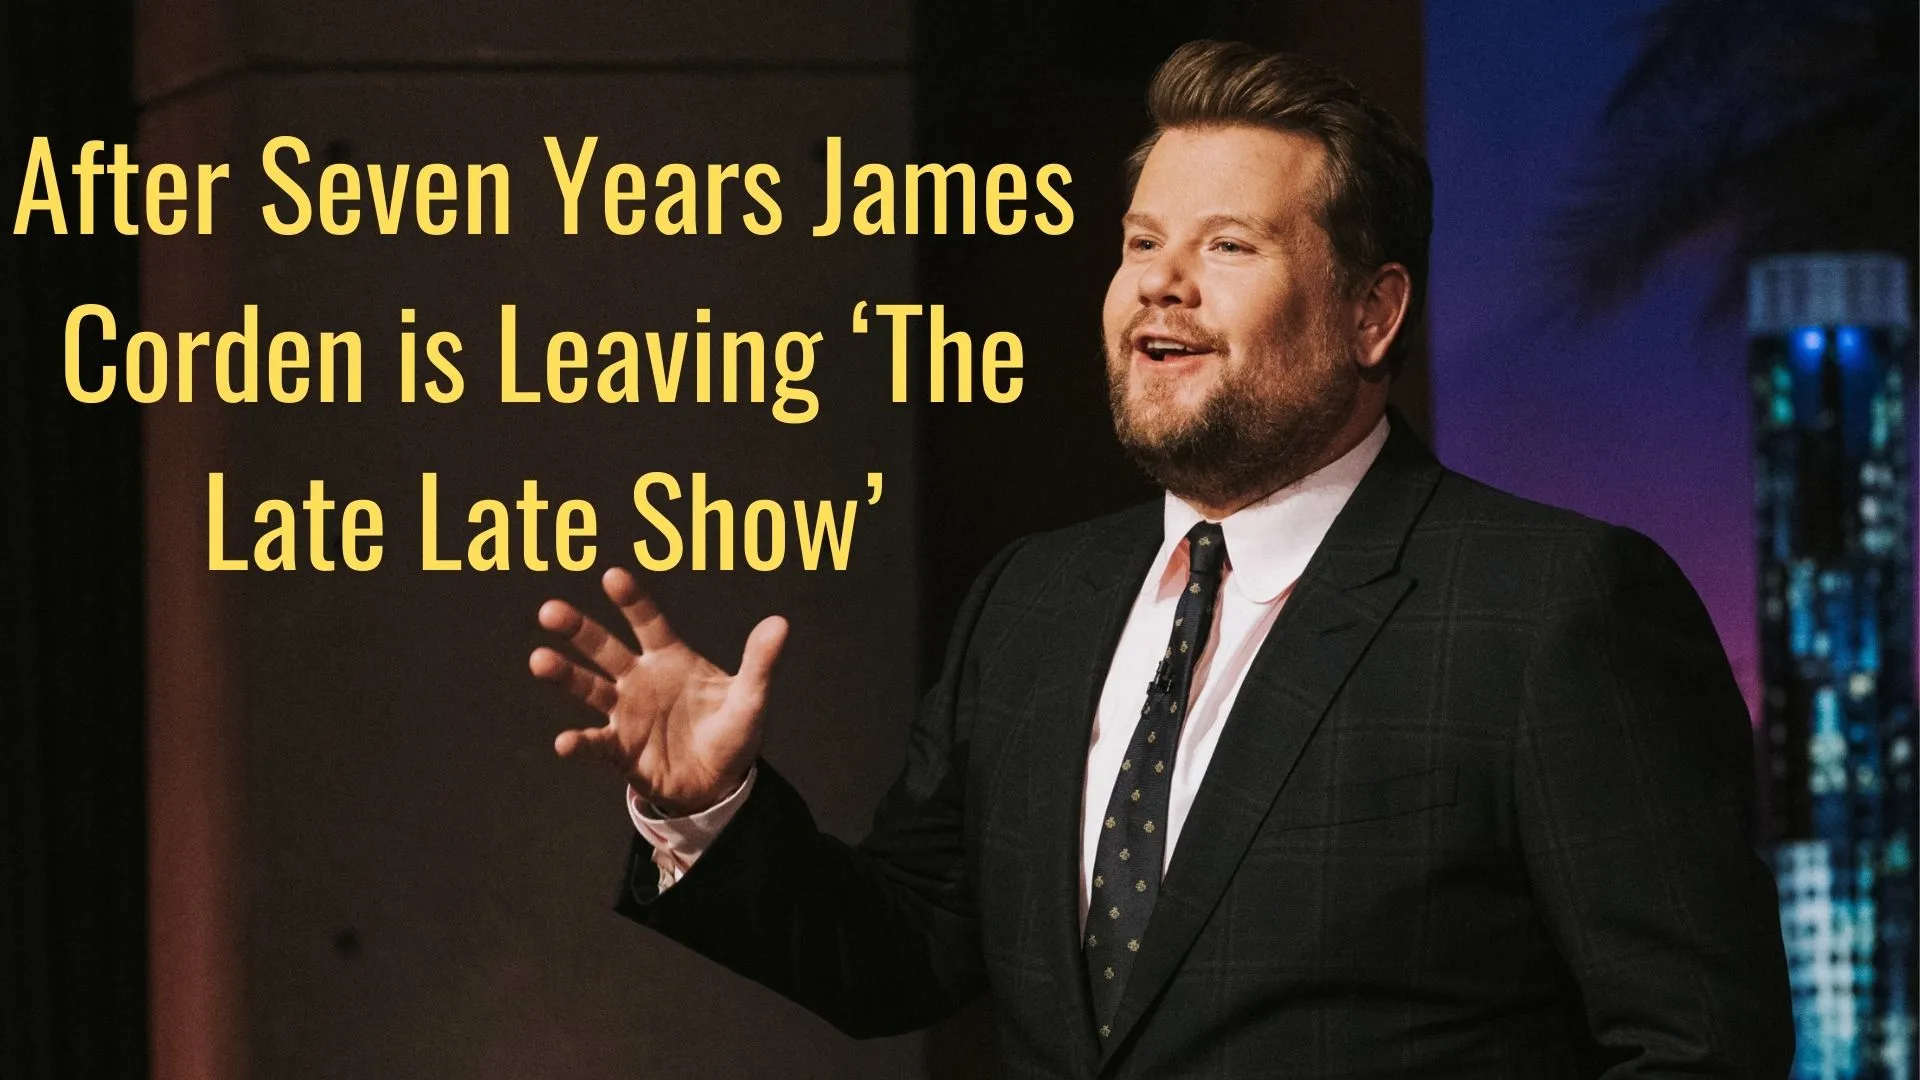 After Seven Years James Corden is Leaving ‘The Late Late Show’